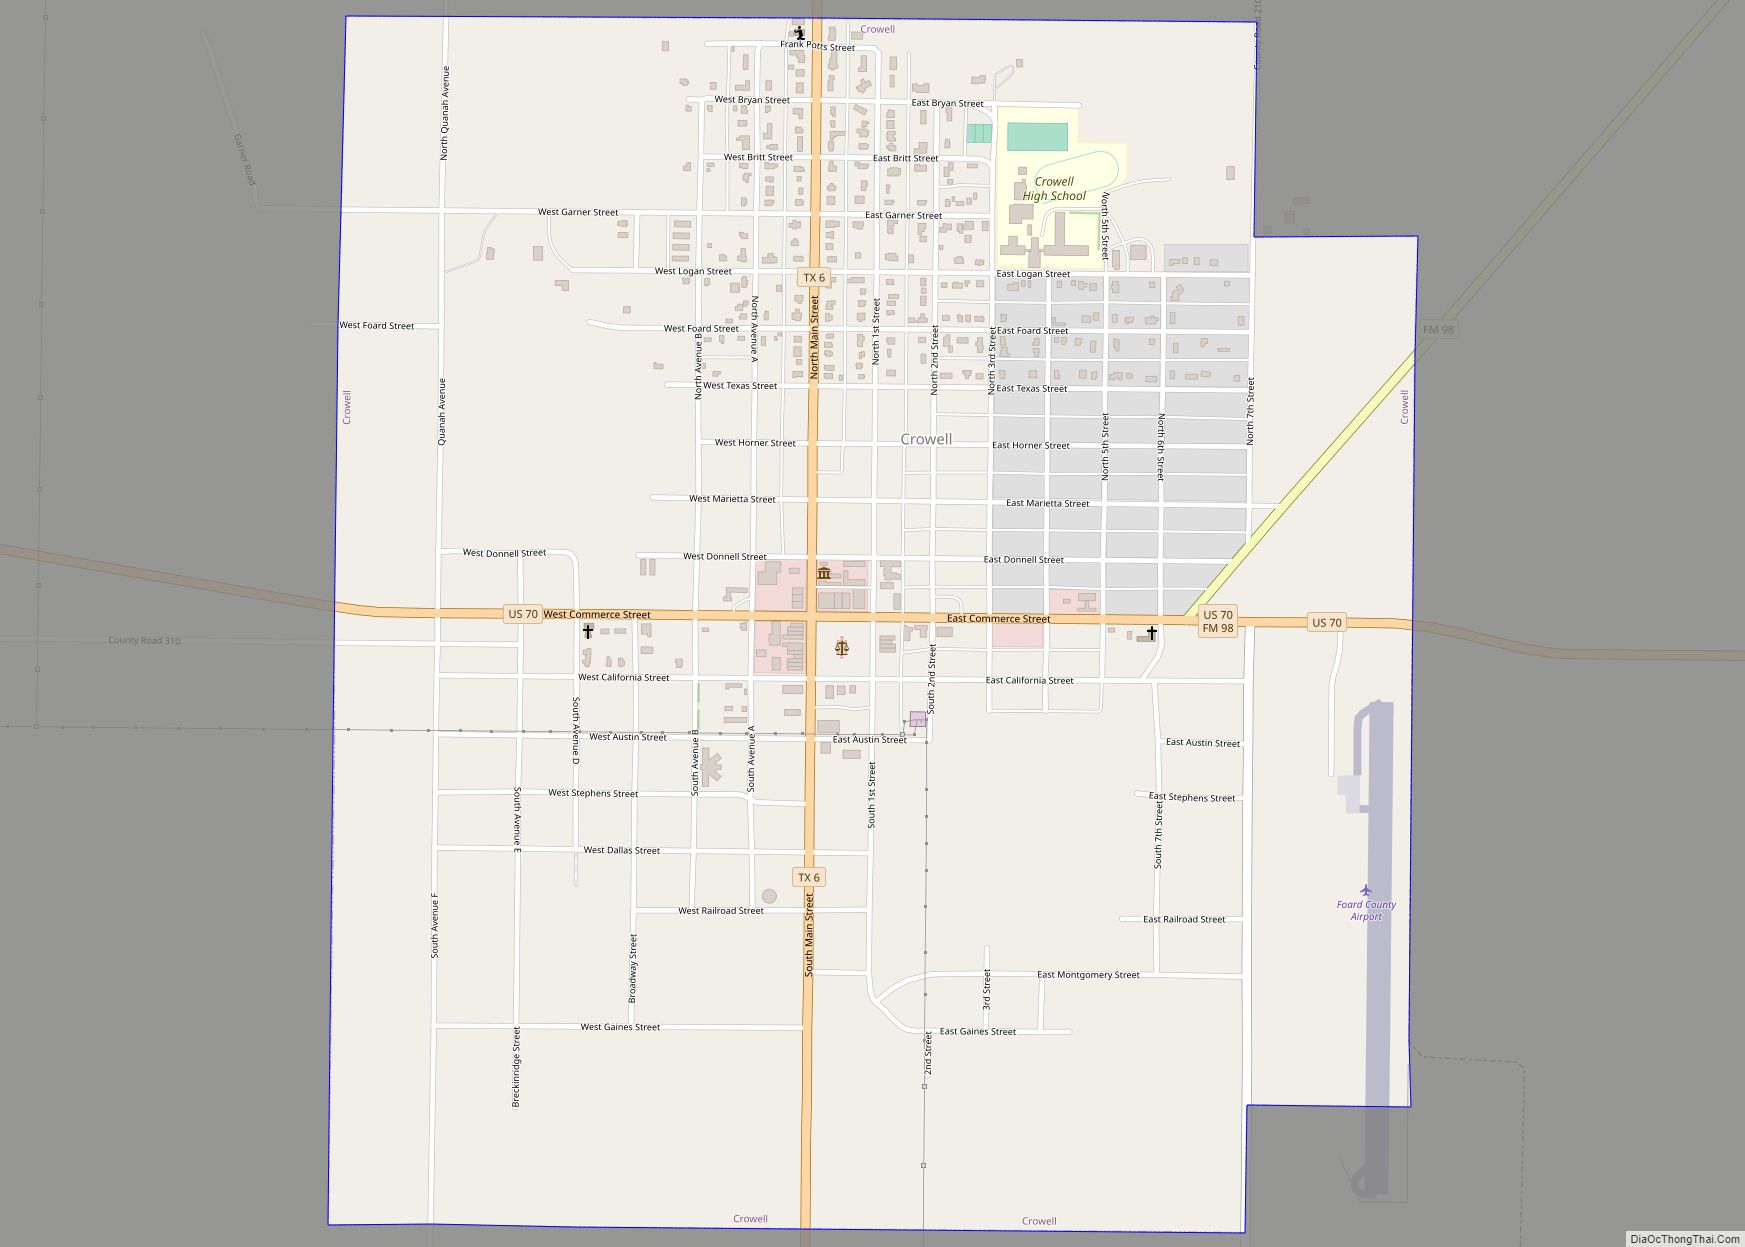 Map of Crowell city